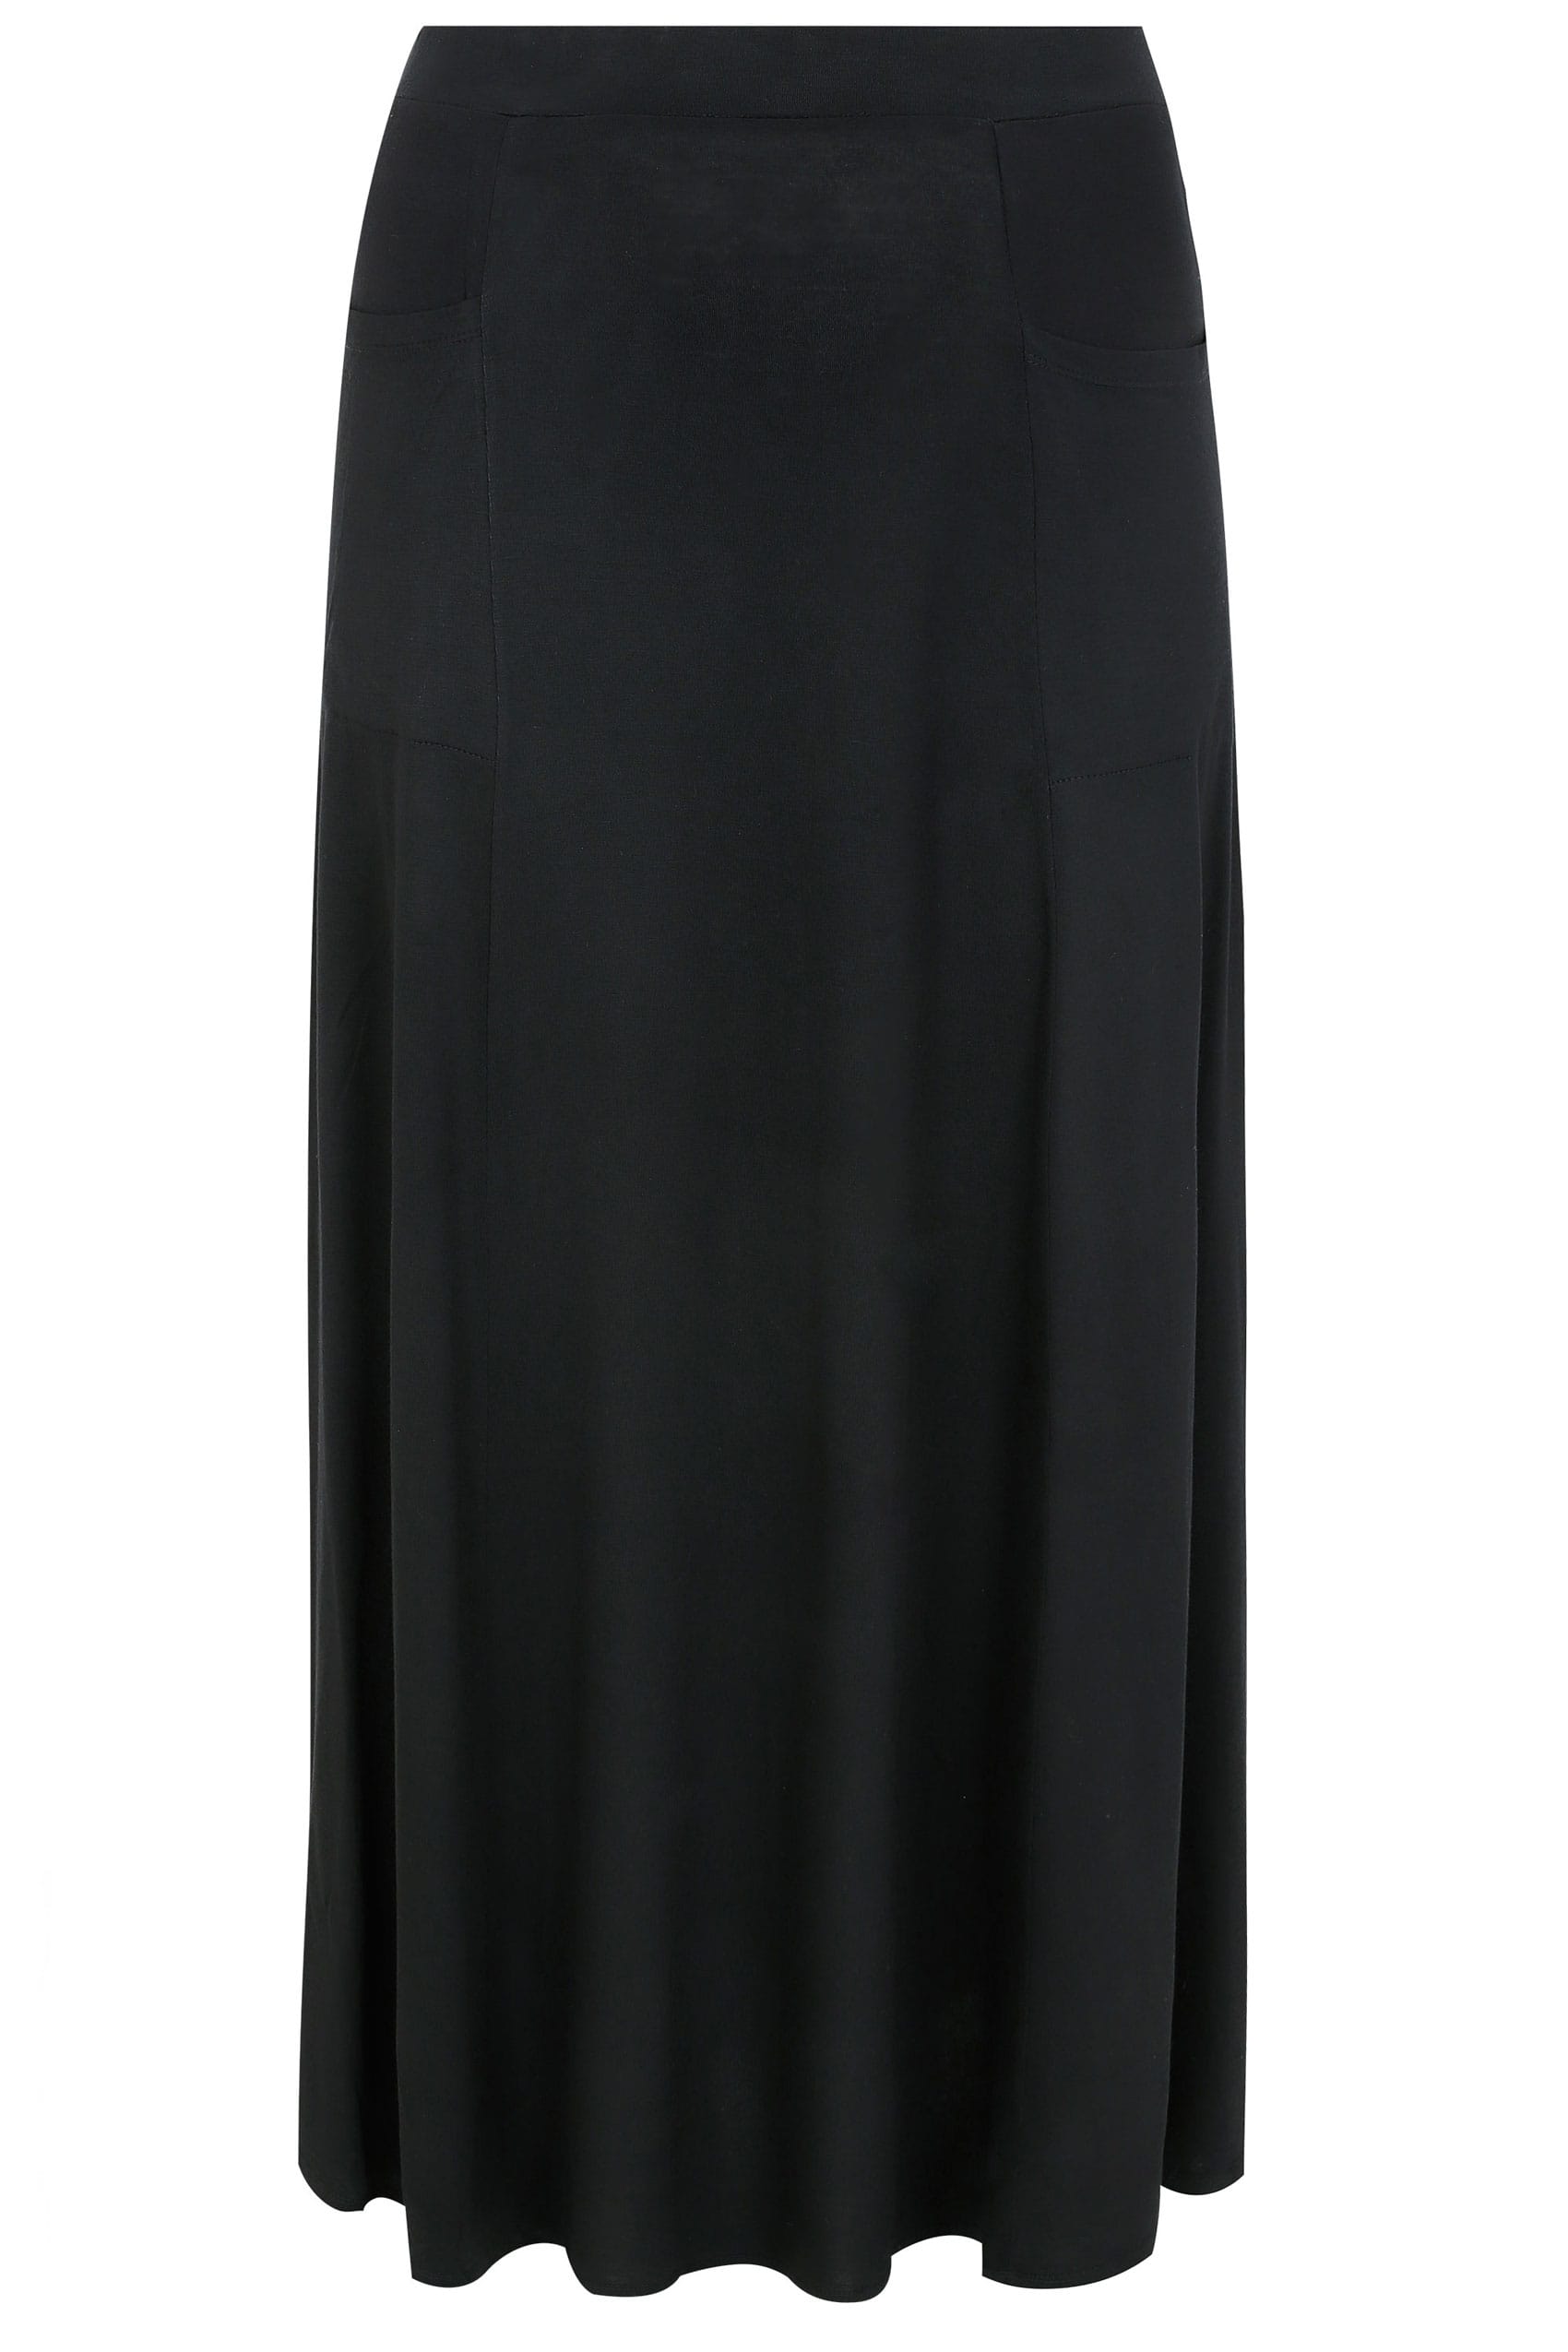 Black Maxi Jersey Skirt With Pockets, Plus size 16 to 36